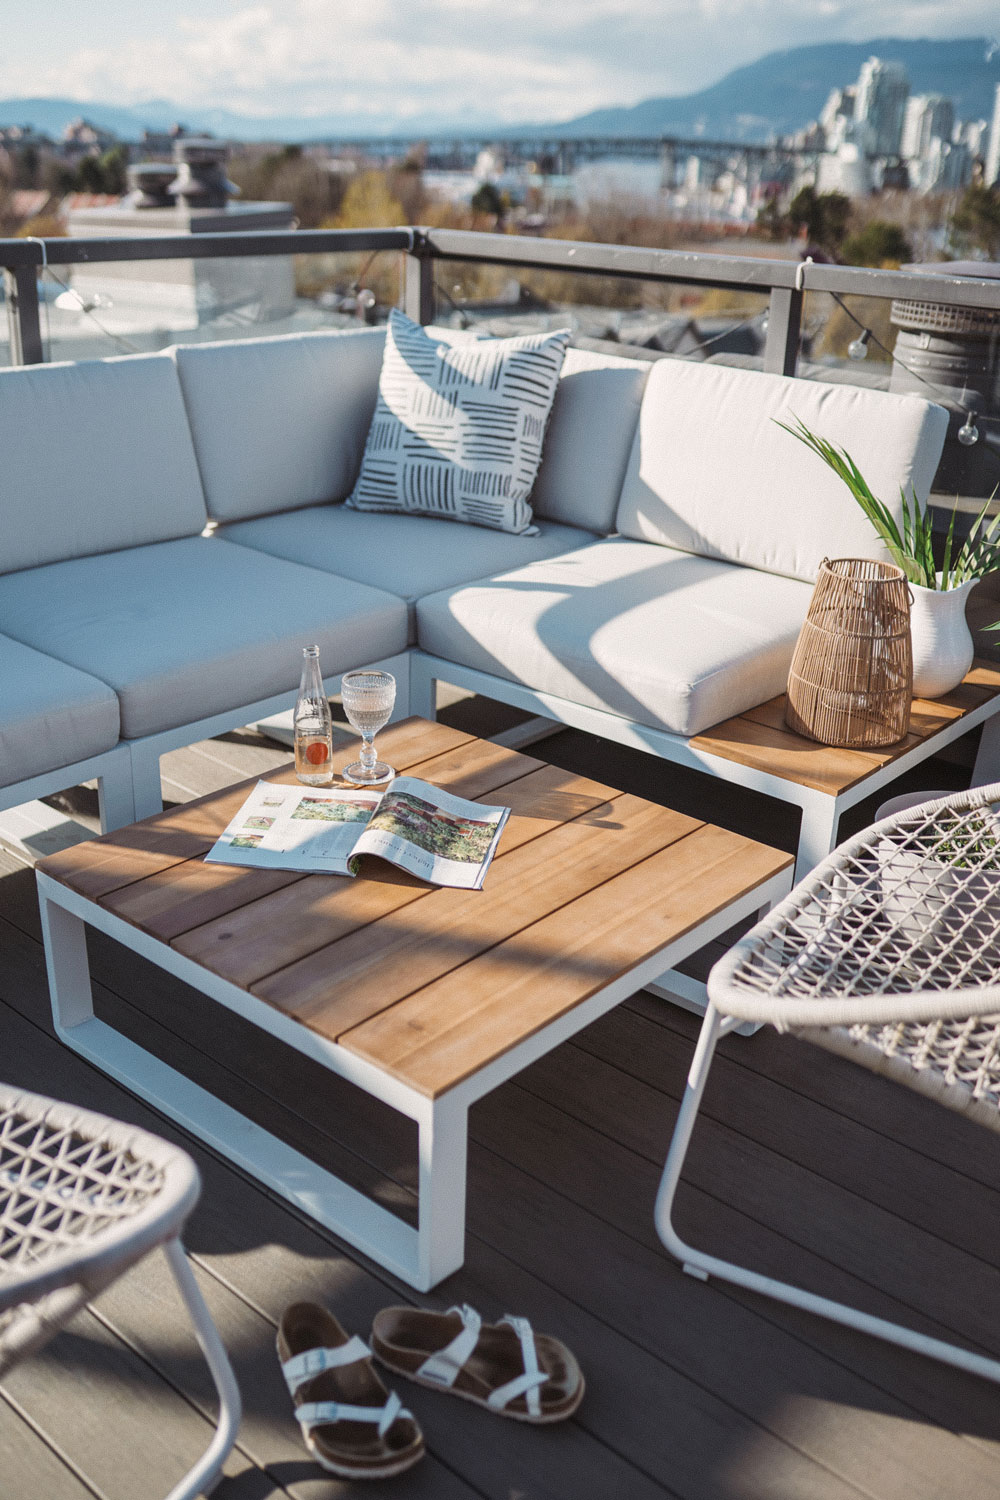 Patio furniture for small spaces